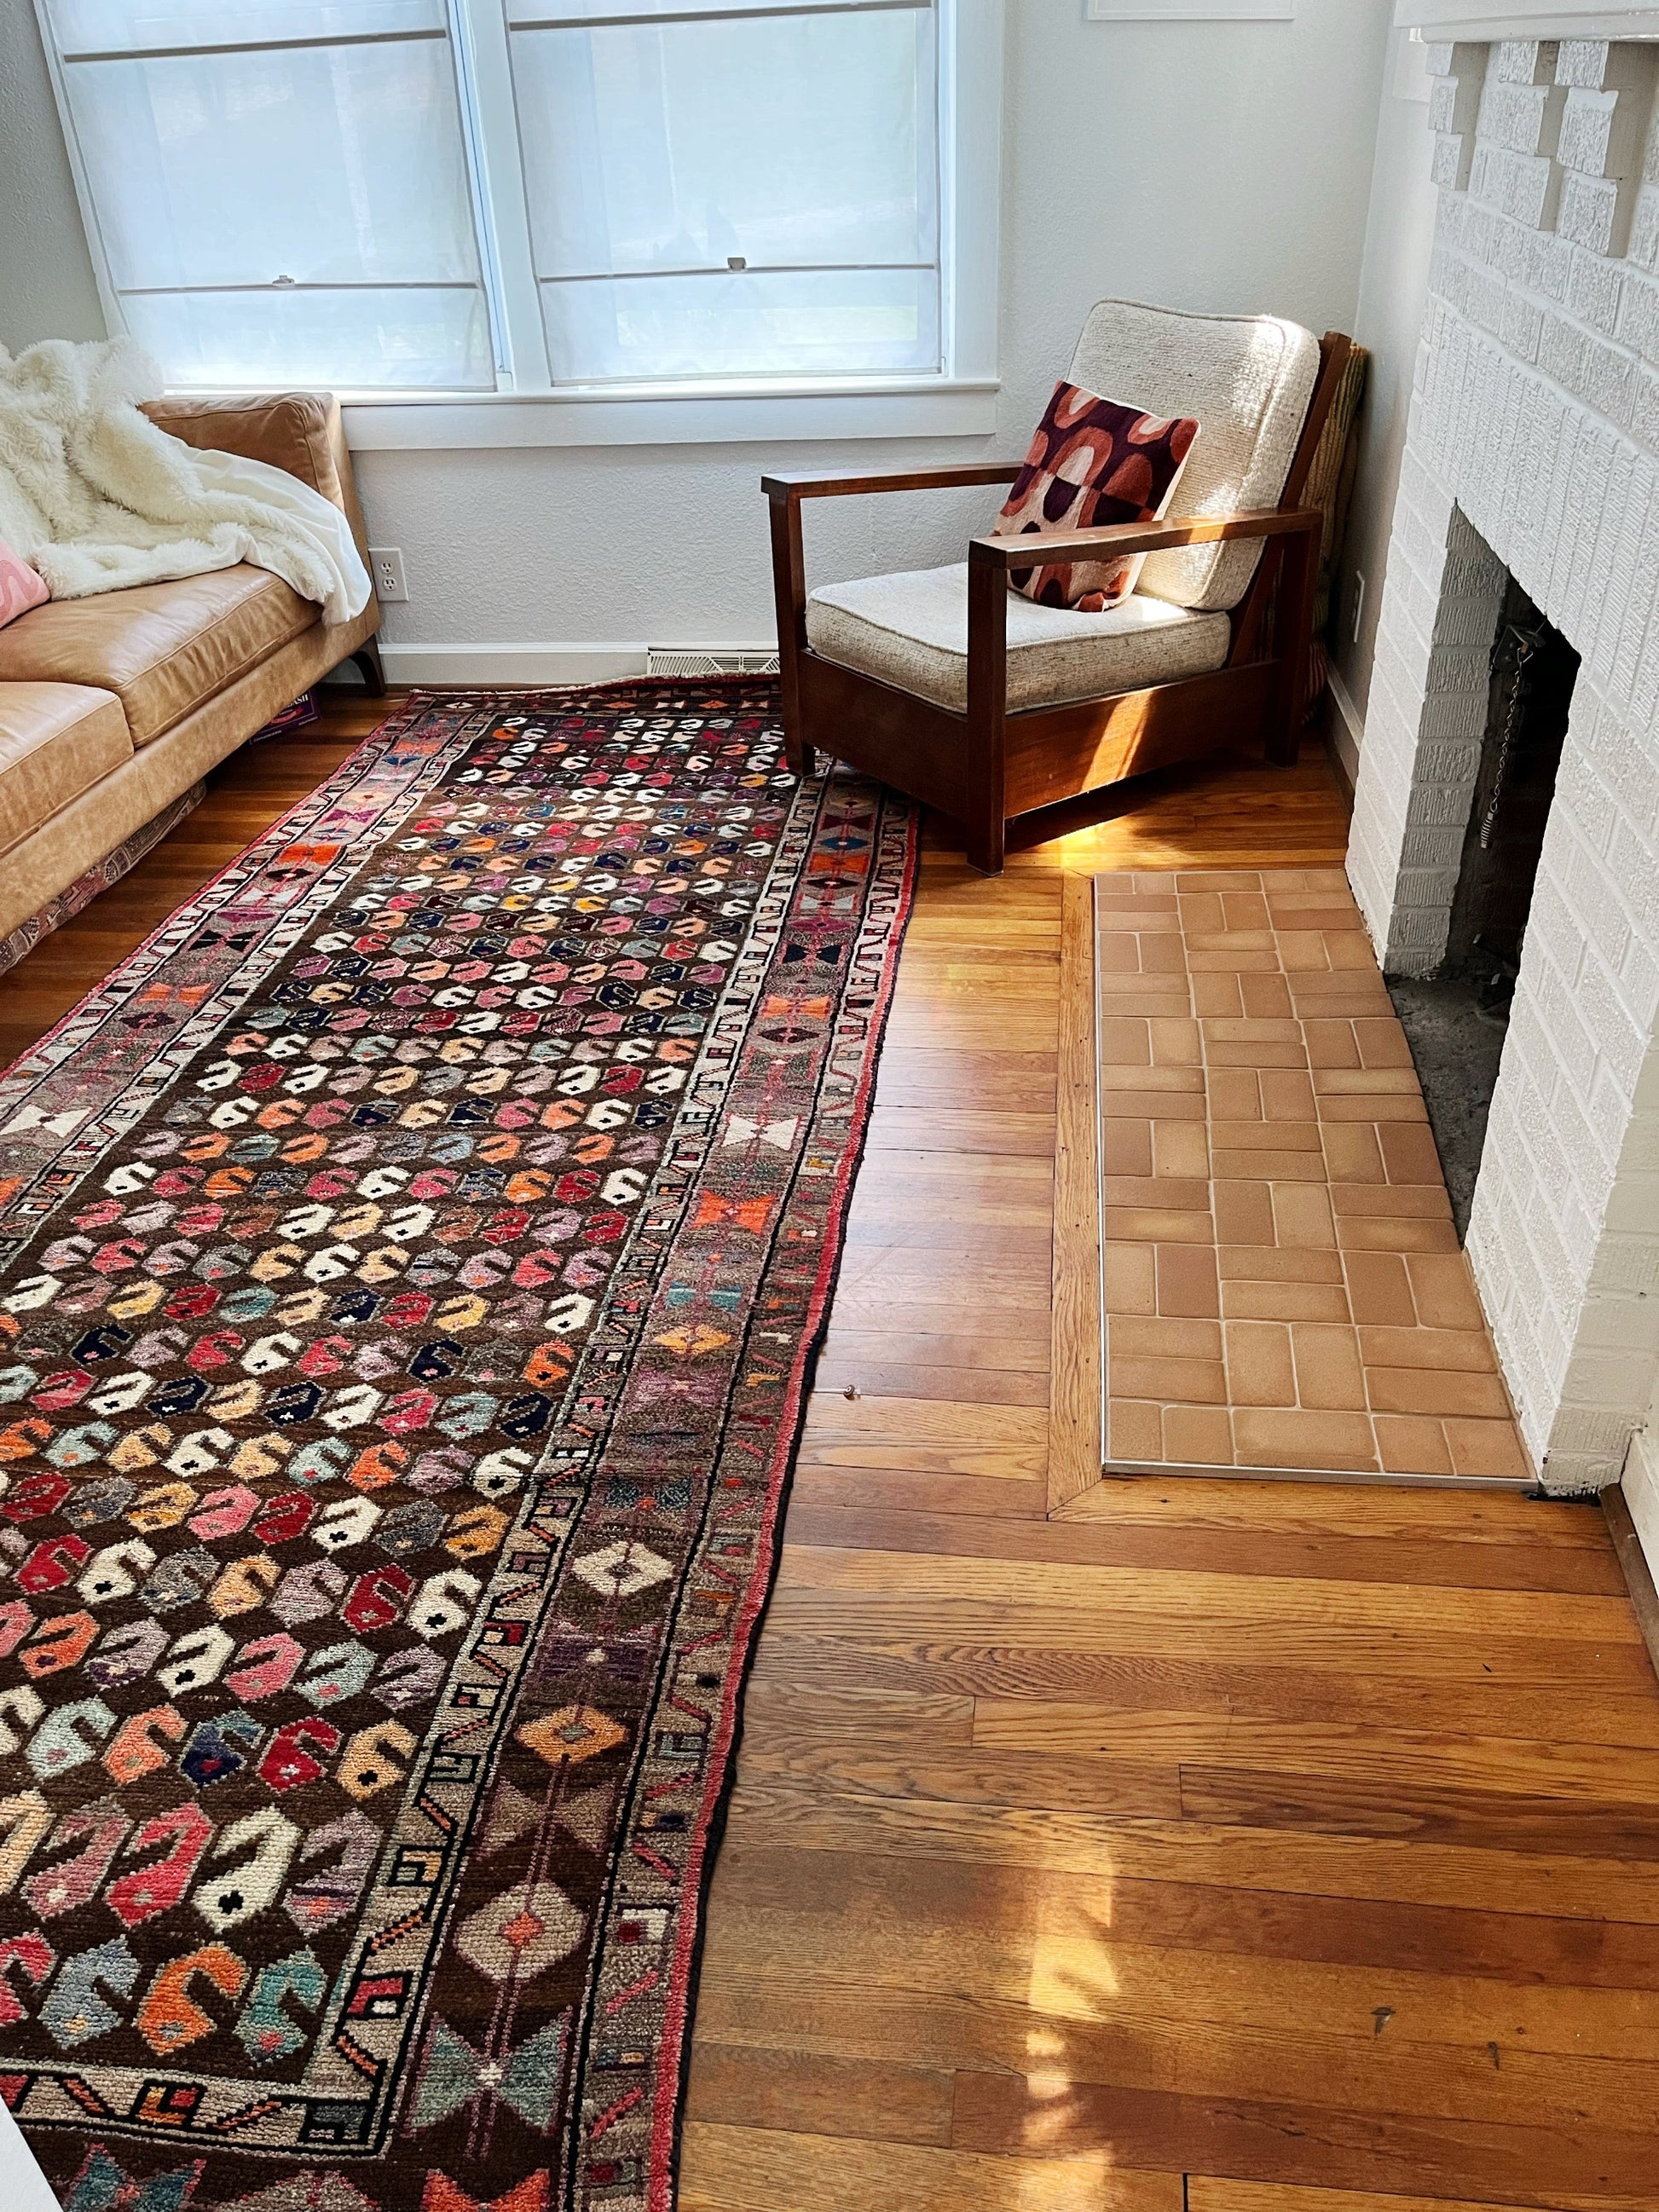 The Dina Persian rug presents charming motifs that would create a lovely atmosphere in a living room, bedroom, or kitchen